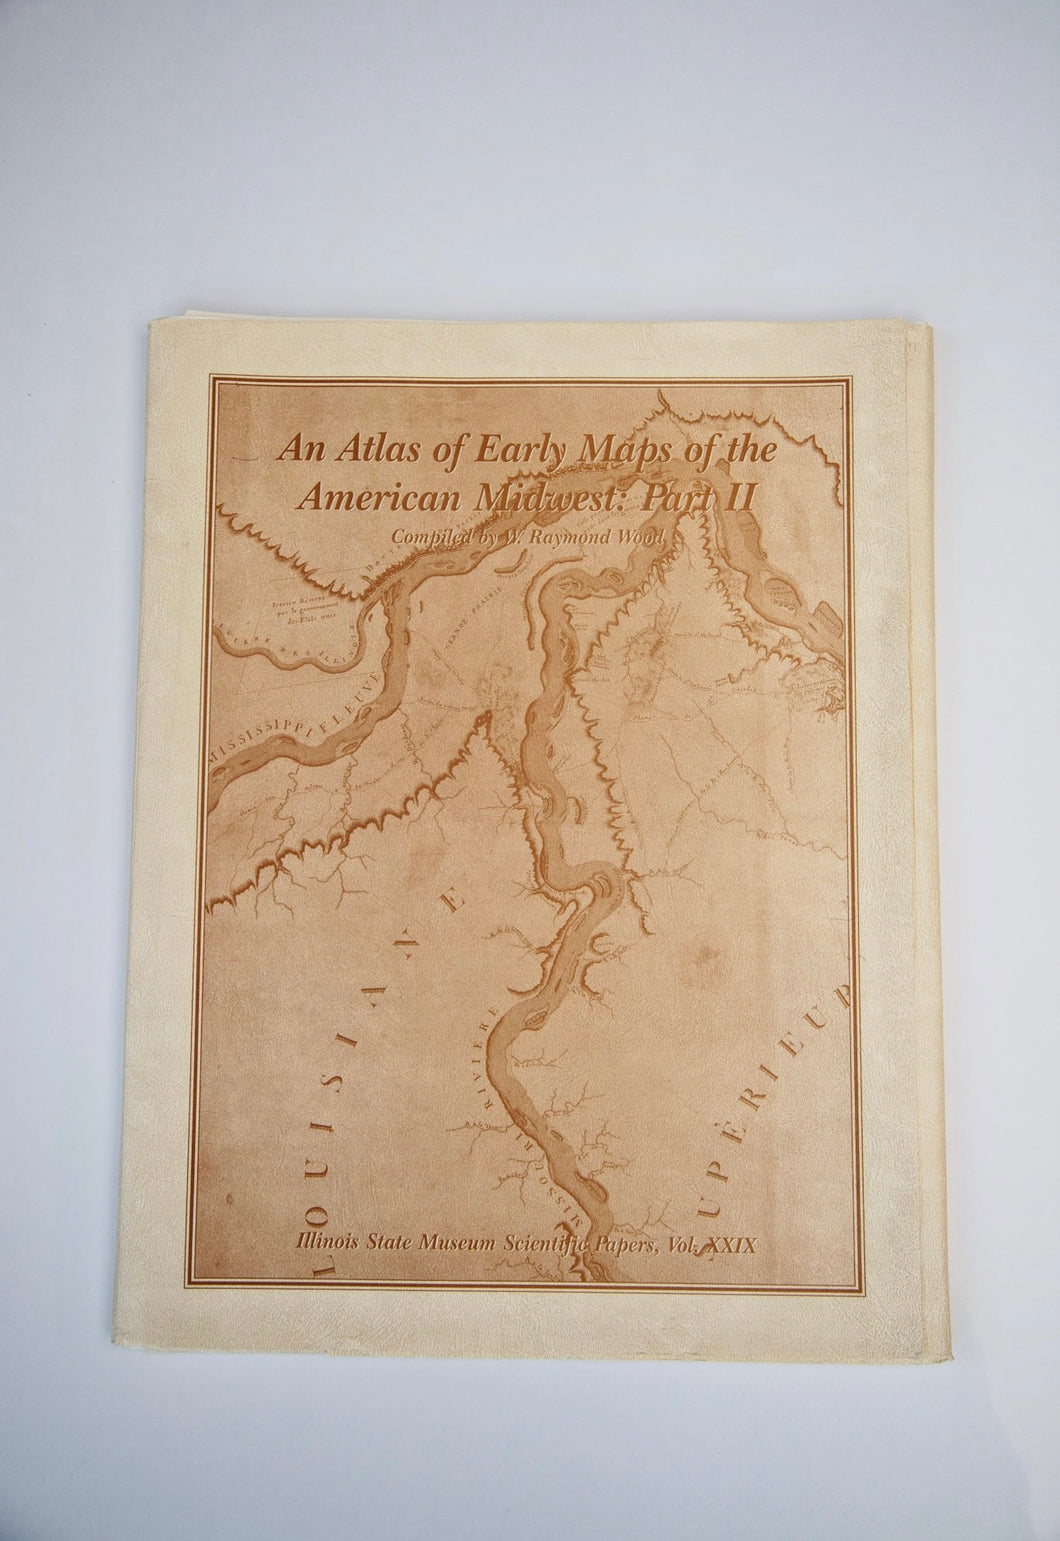 Photo of the front cover of “An Atlas of Early Maps of the American Midwest: Part II”